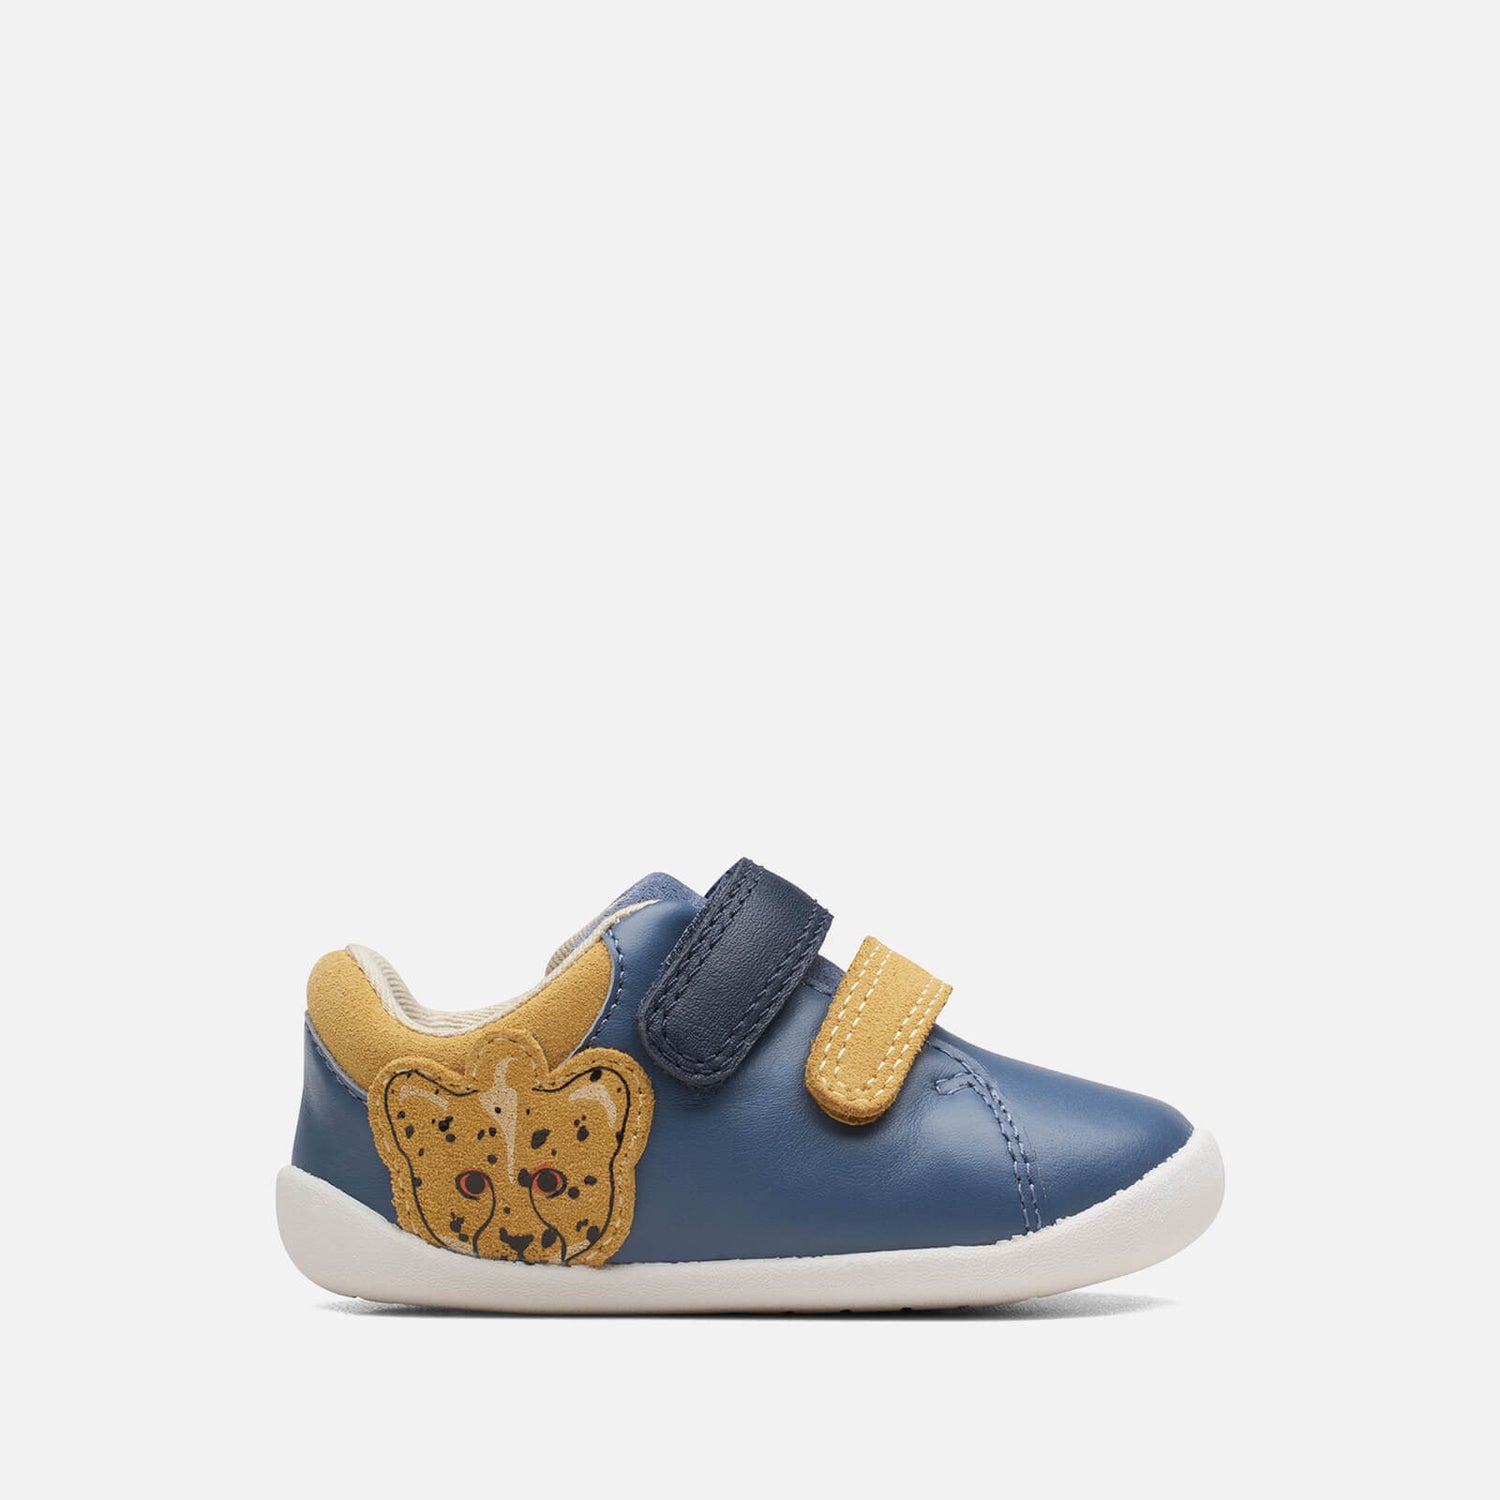 Clarks Toddlers First Roamer Race Shoes - Denim Blue - UK 3 Baby